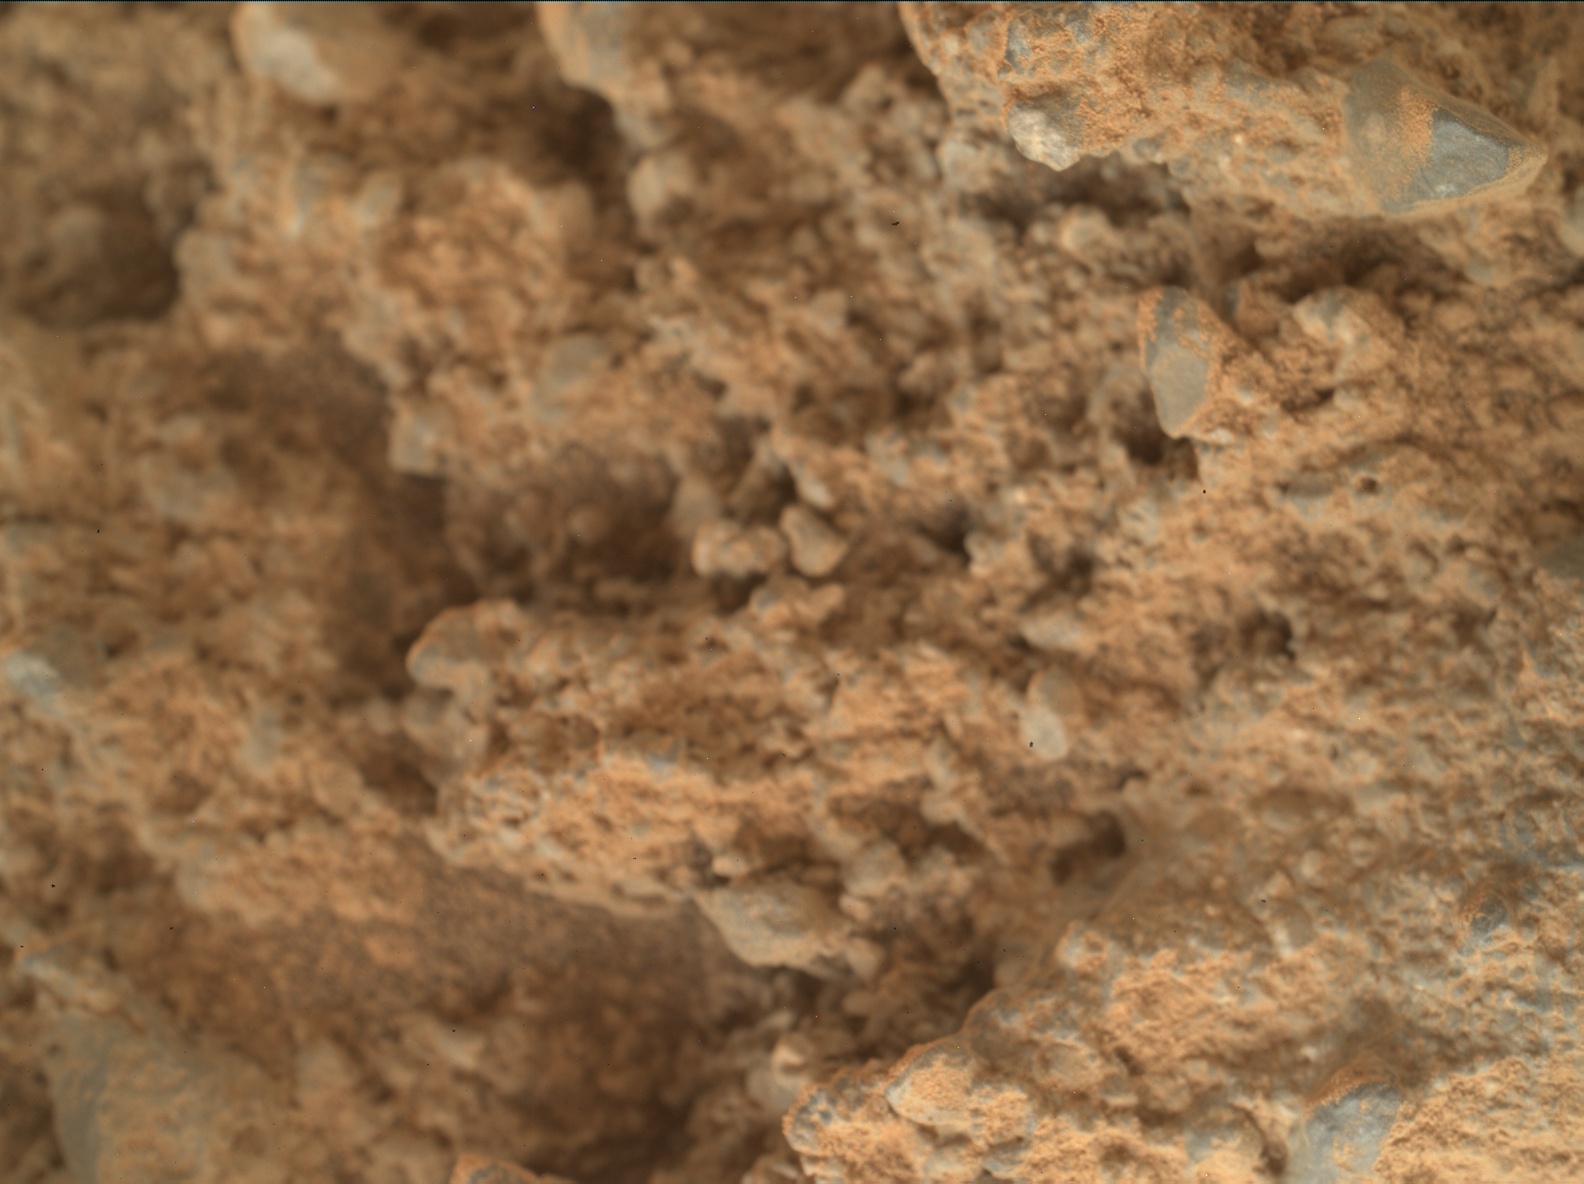 Nasa's Mars rover Curiosity acquired this image using its Mars Hand Lens Imager (MAHLI) on Sol 399